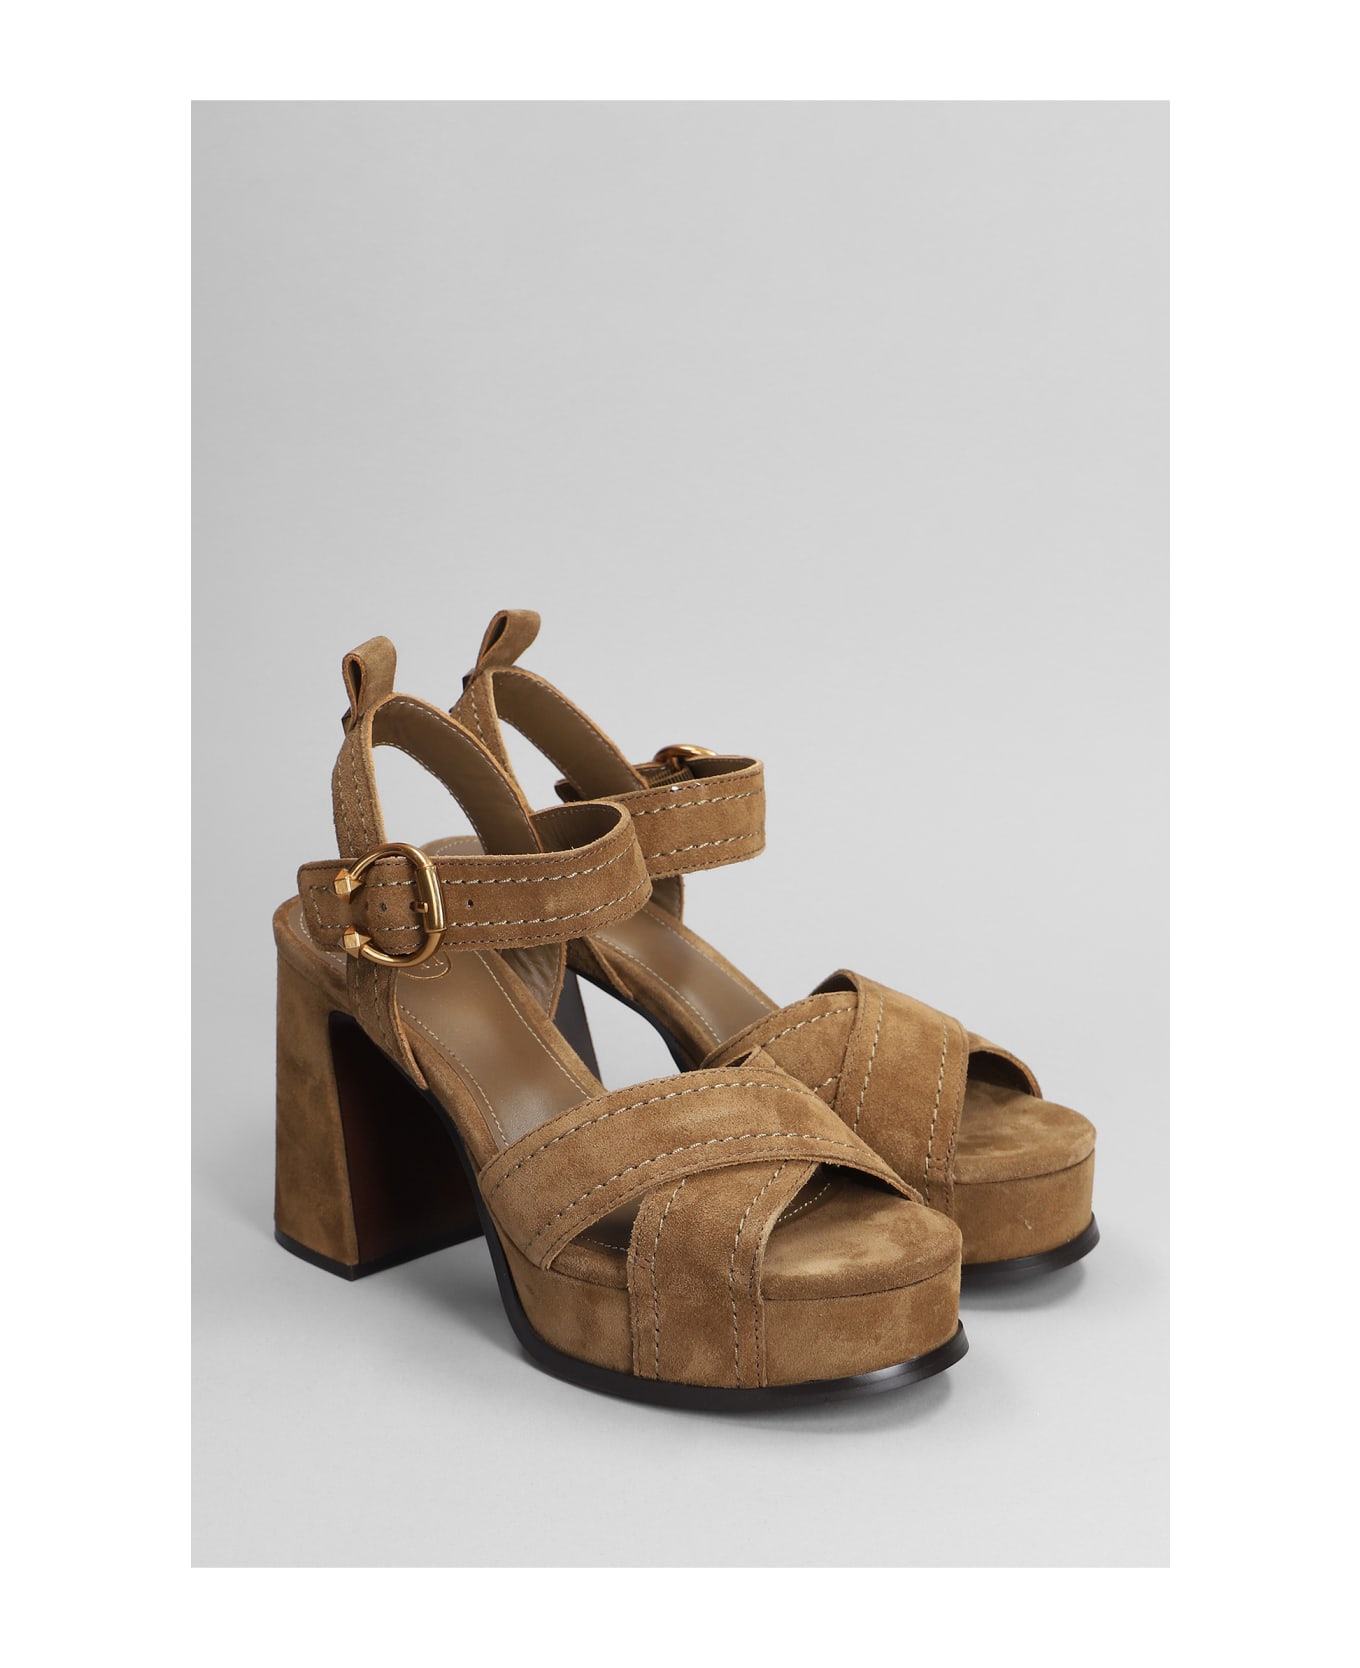 Ash Melany Sandals In Brown Suede サンダル